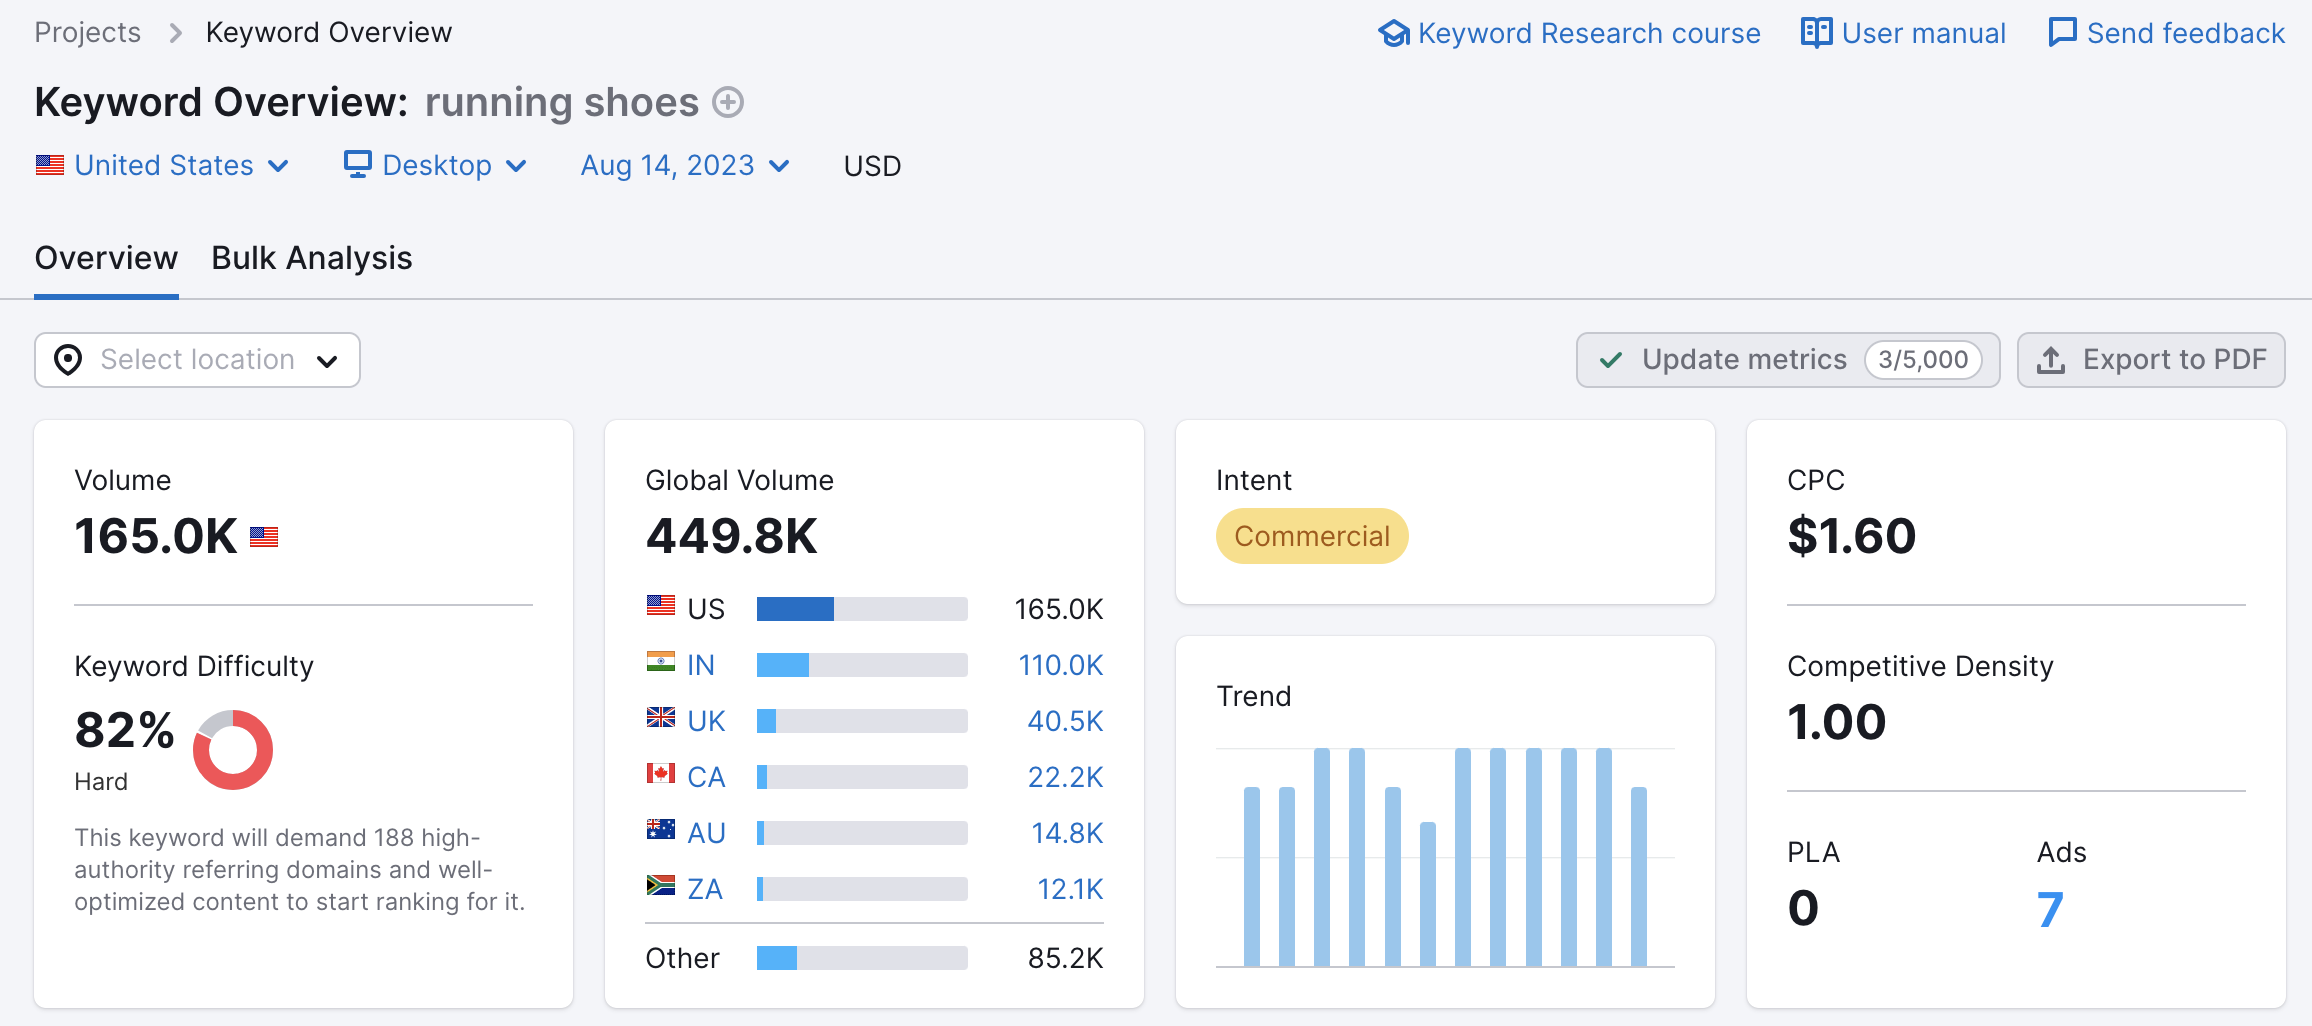 Interface of a Keyword Overview report for the "running shoes" keyword. The widgets present metrics such as National and Global volume, Intent, or Keyword Difficulty, Trend, CPC, Competitive Density, PLA, and Ads on a national level.